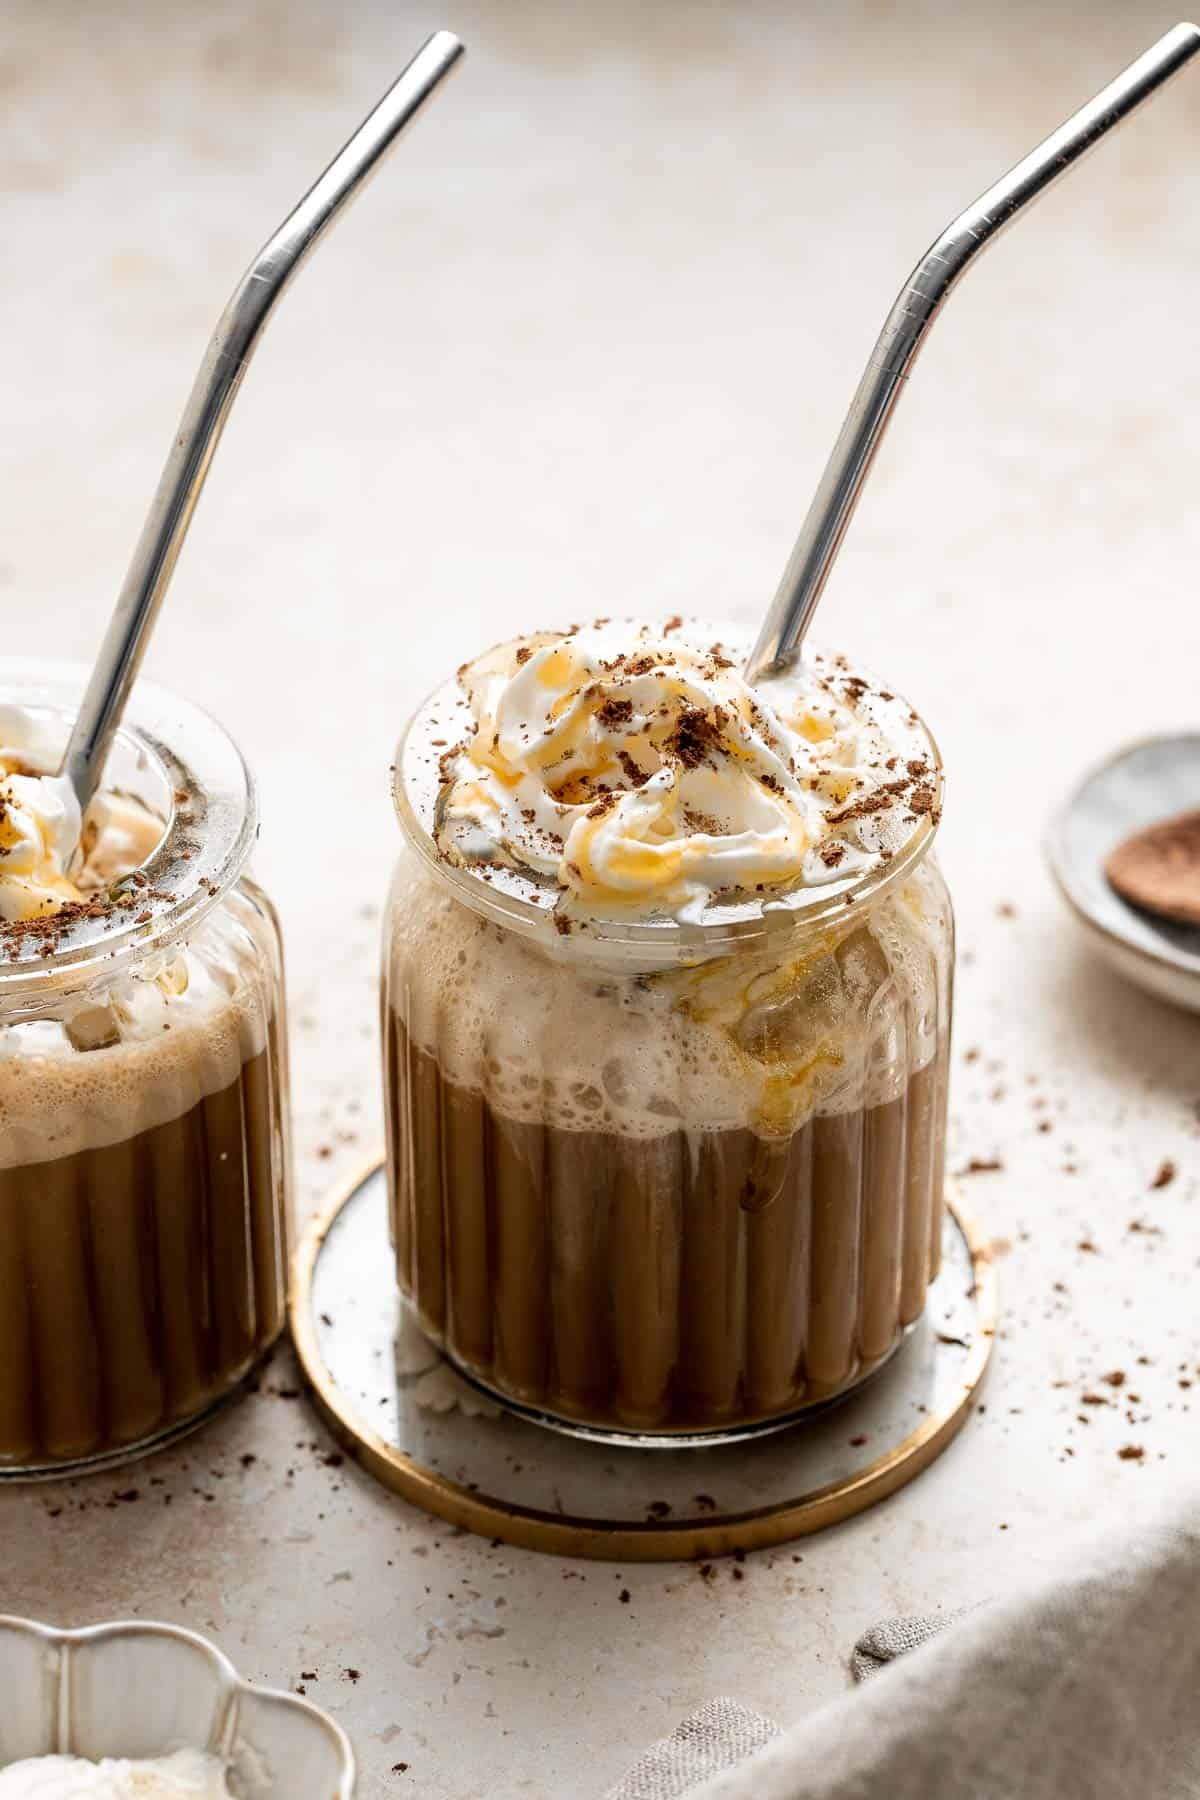 This Starbucks copycat Frappuccino recipe is icy, frothy, sweet, and milky. It’s faster and cheaper than the store-bought version and tastes just as good! | aheadofthyme.com